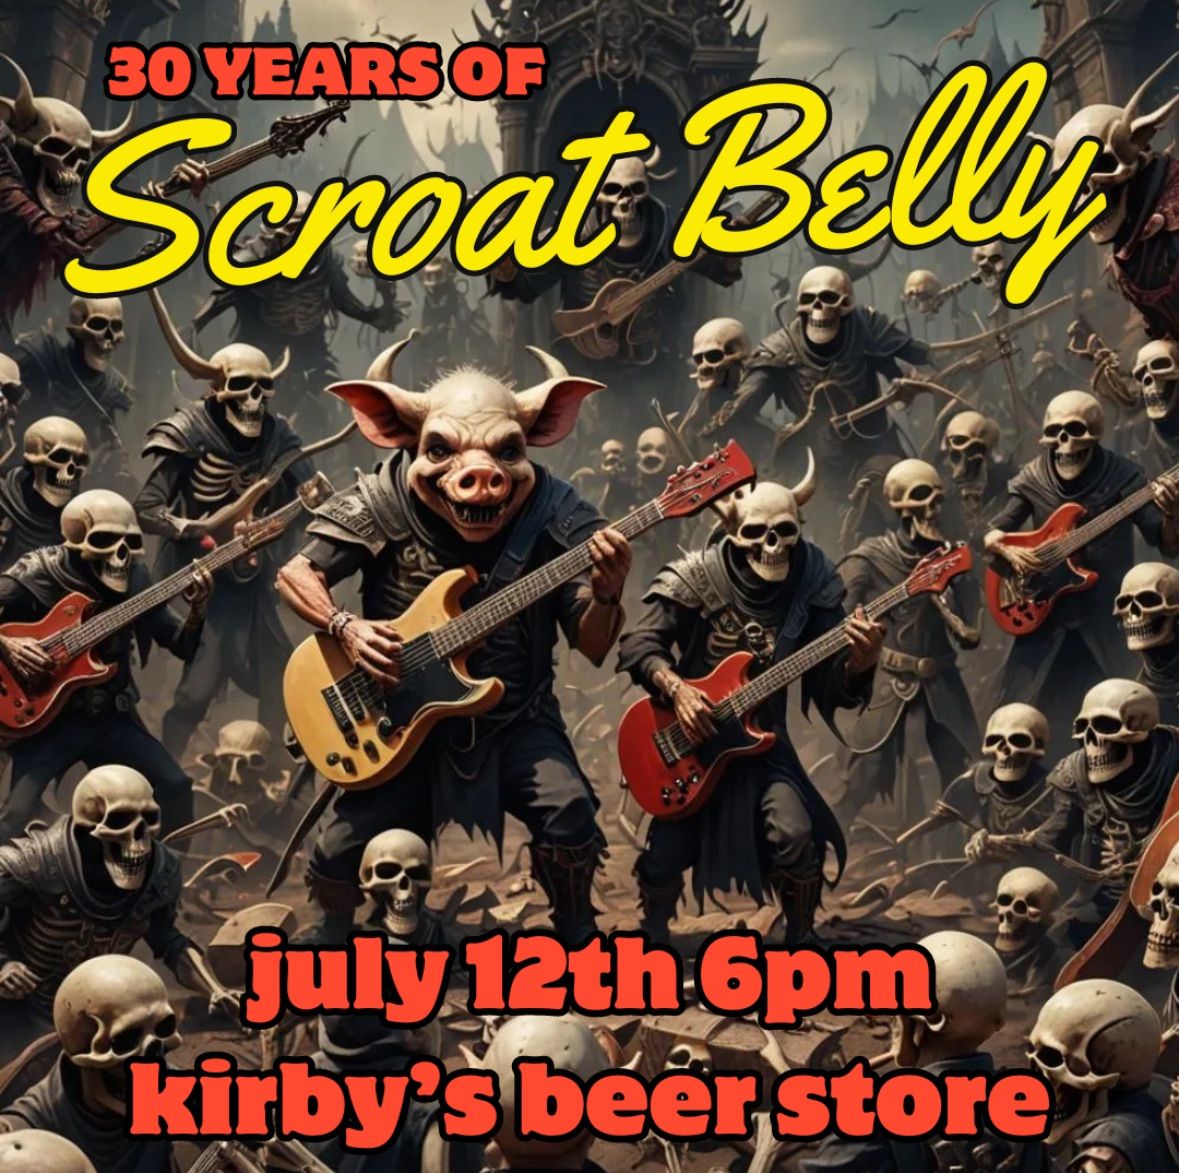 SCROAT BELLY!! 30th Anniversary!!